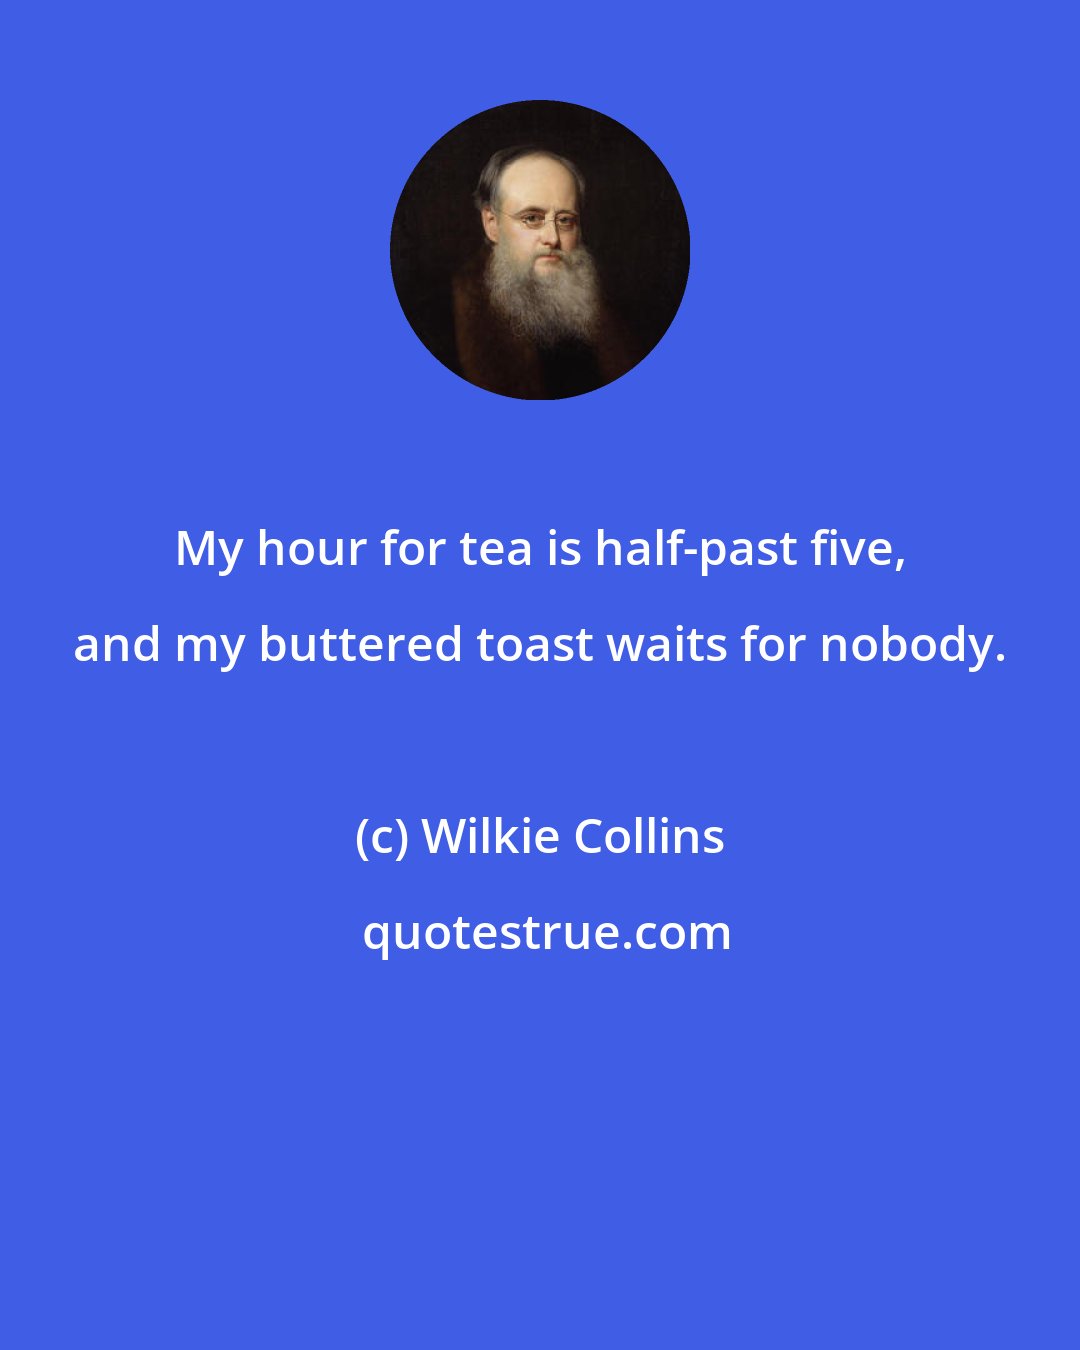 Wilkie Collins: My hour for tea is half-past five, and my buttered toast waits for nobody.